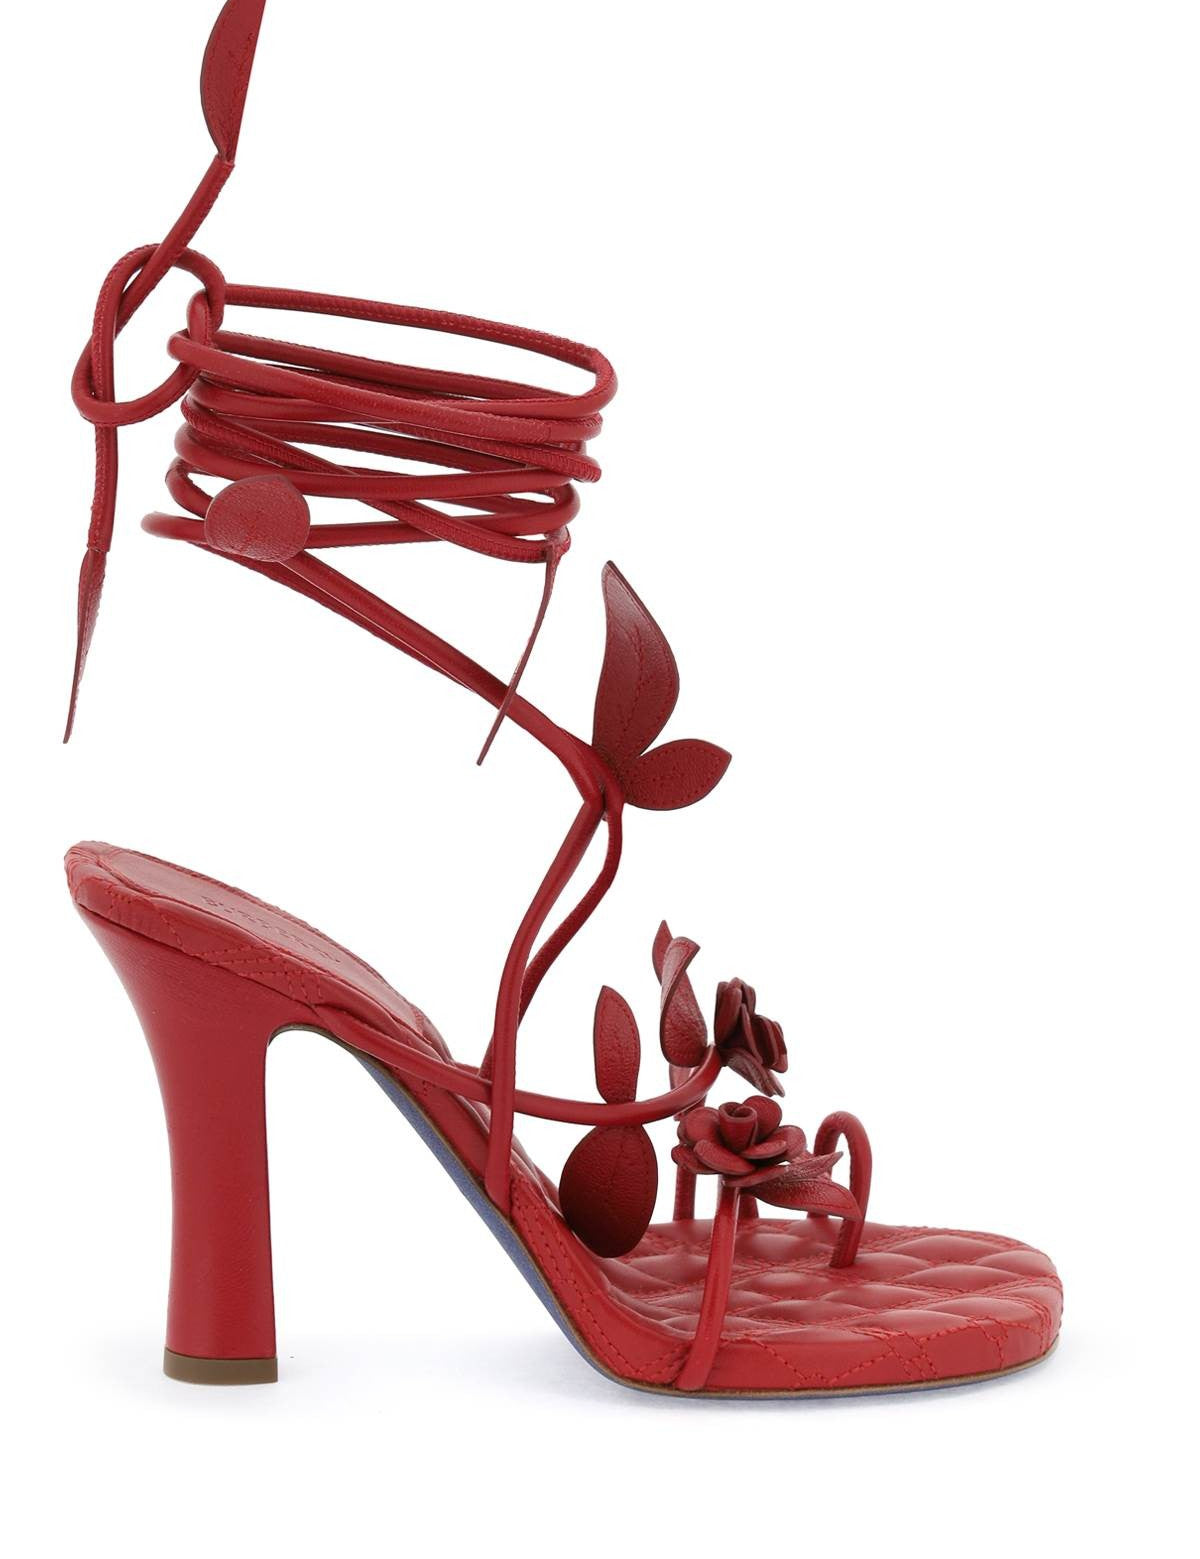 burberry-ivy-flora-leather-sandals-with-heel.jpg